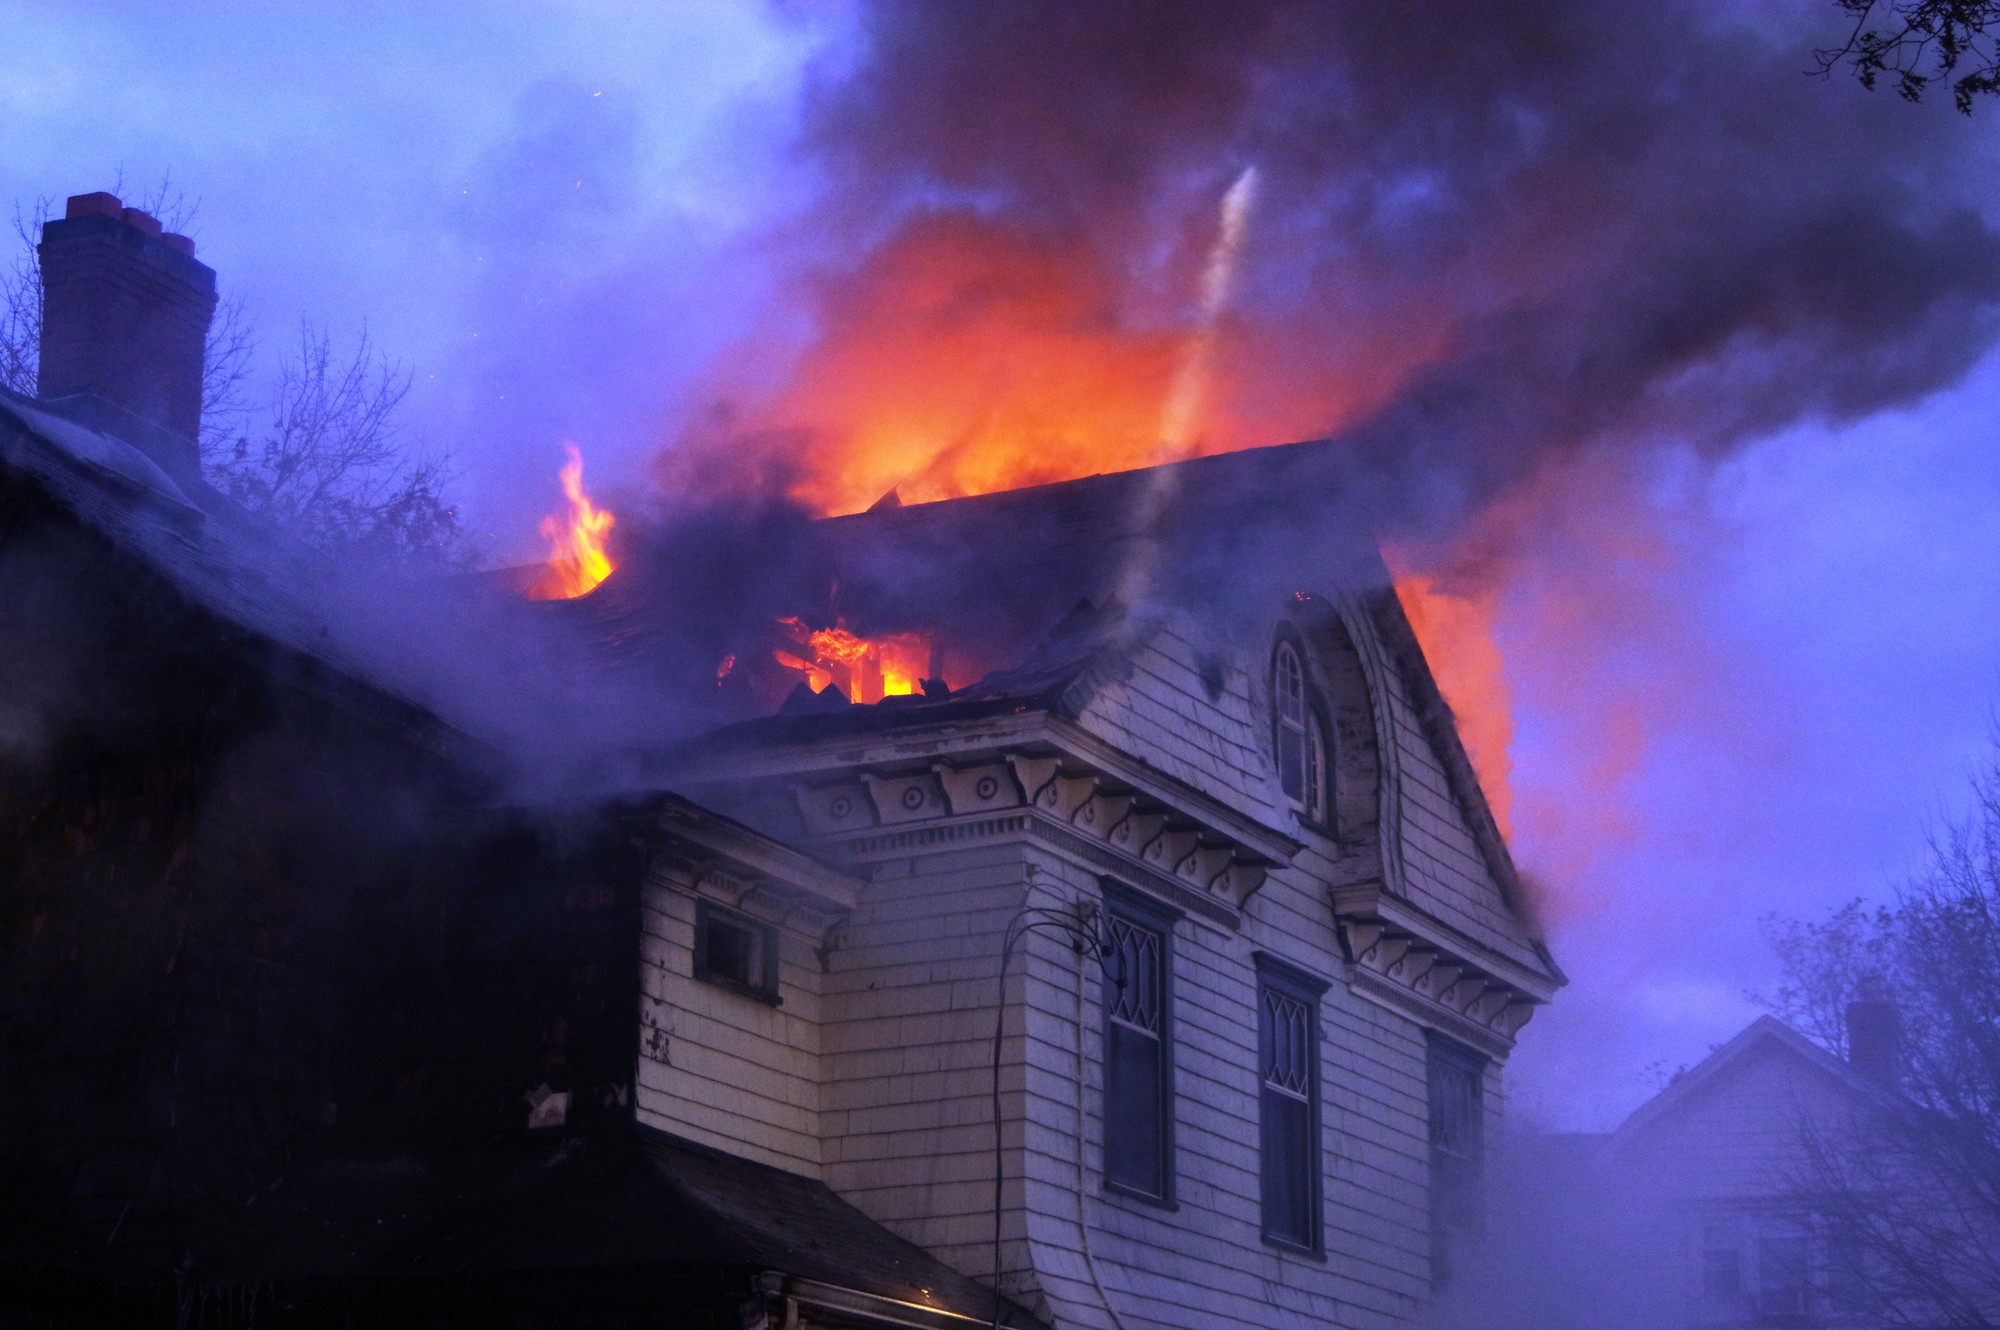 The fire grew rapidly, quickly consuming the entirety of the 85-year-old home.